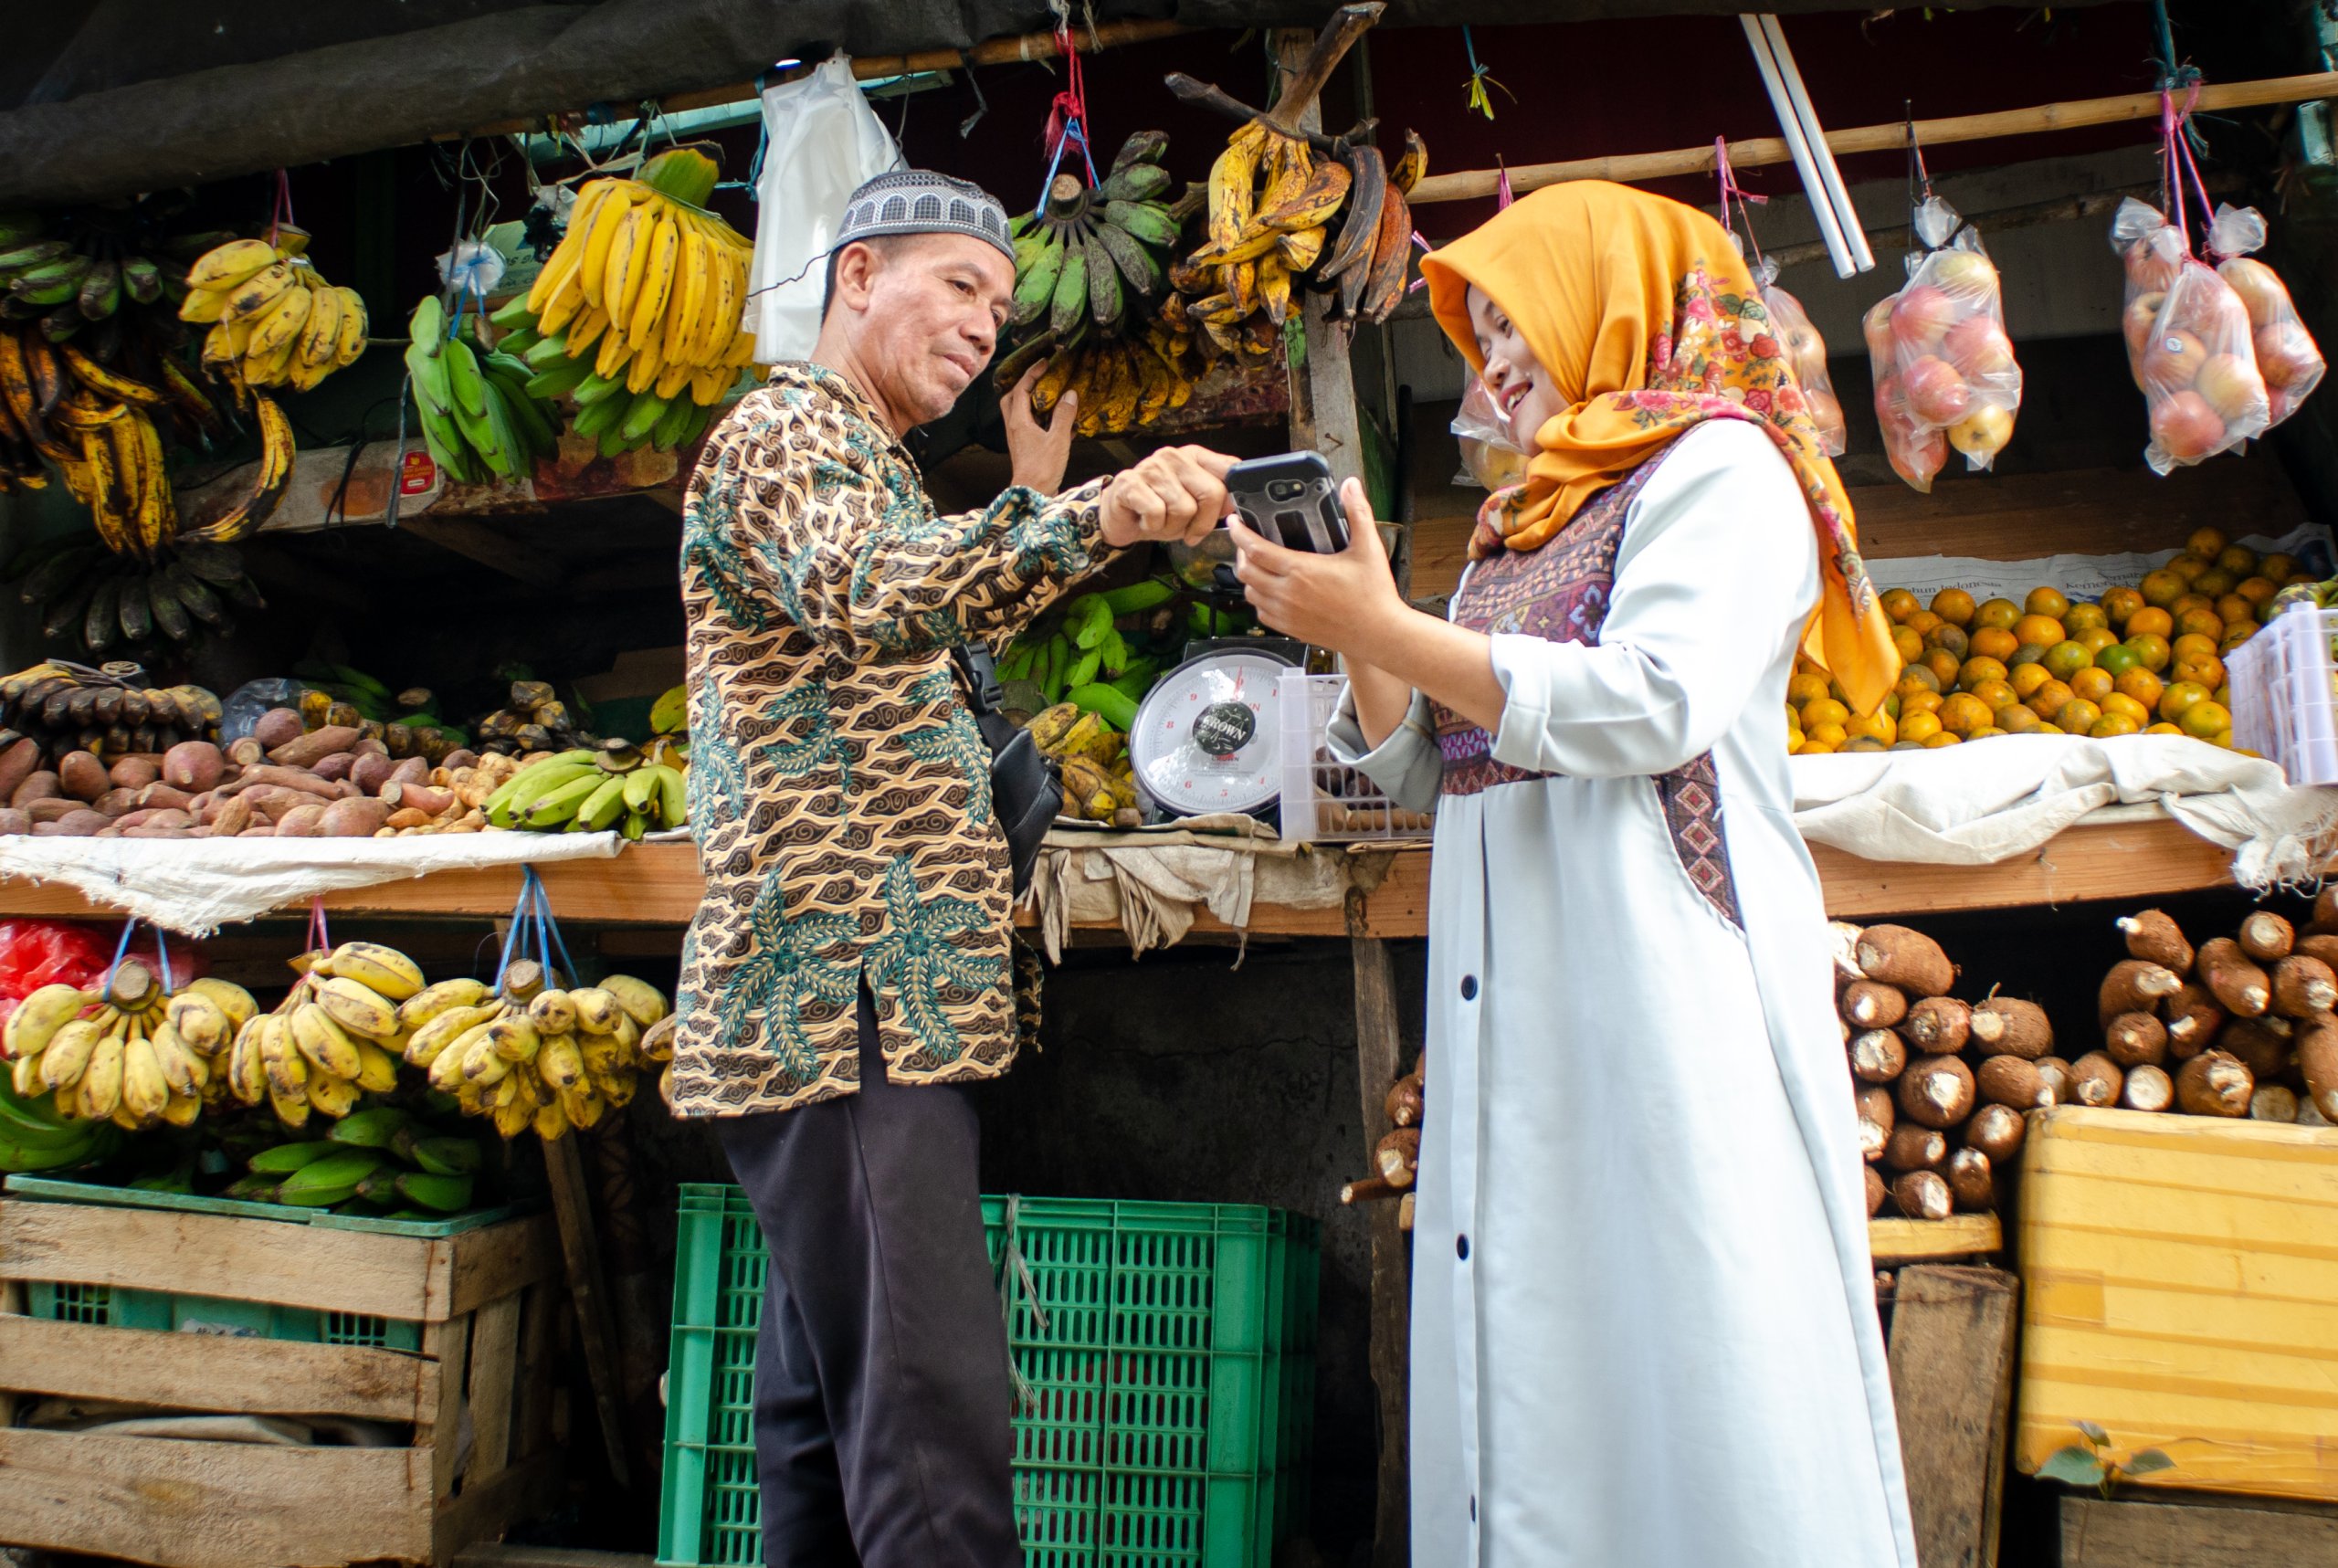 Two individuals engaging in a transaction at a fruit market.